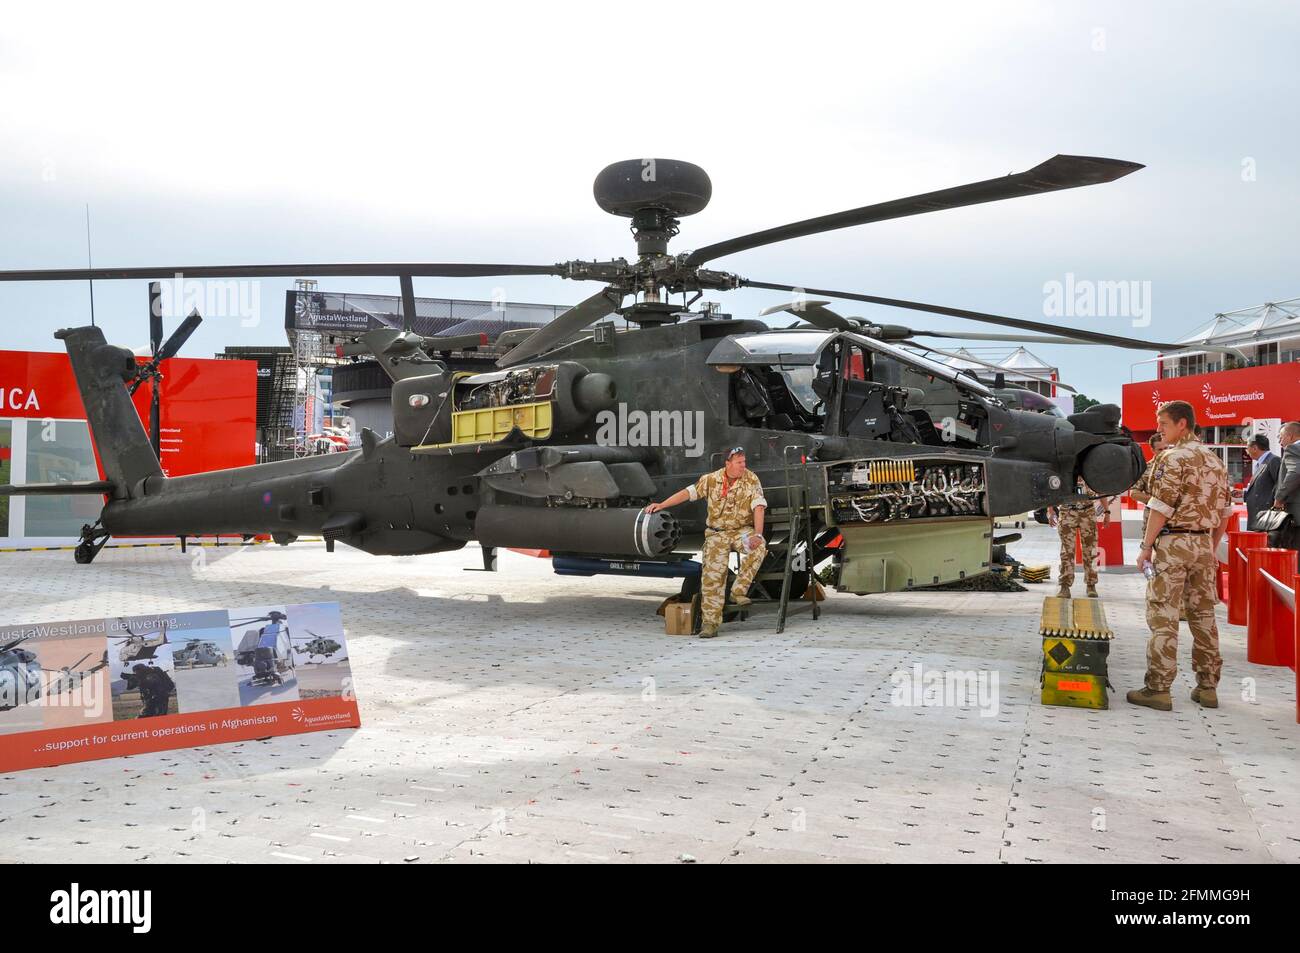 British Army AgustaWestland WAH-64 Apache gunship on display at Farnborough International Airshow. Weapons. Defence industry. Military personnel, crew Stock Photo